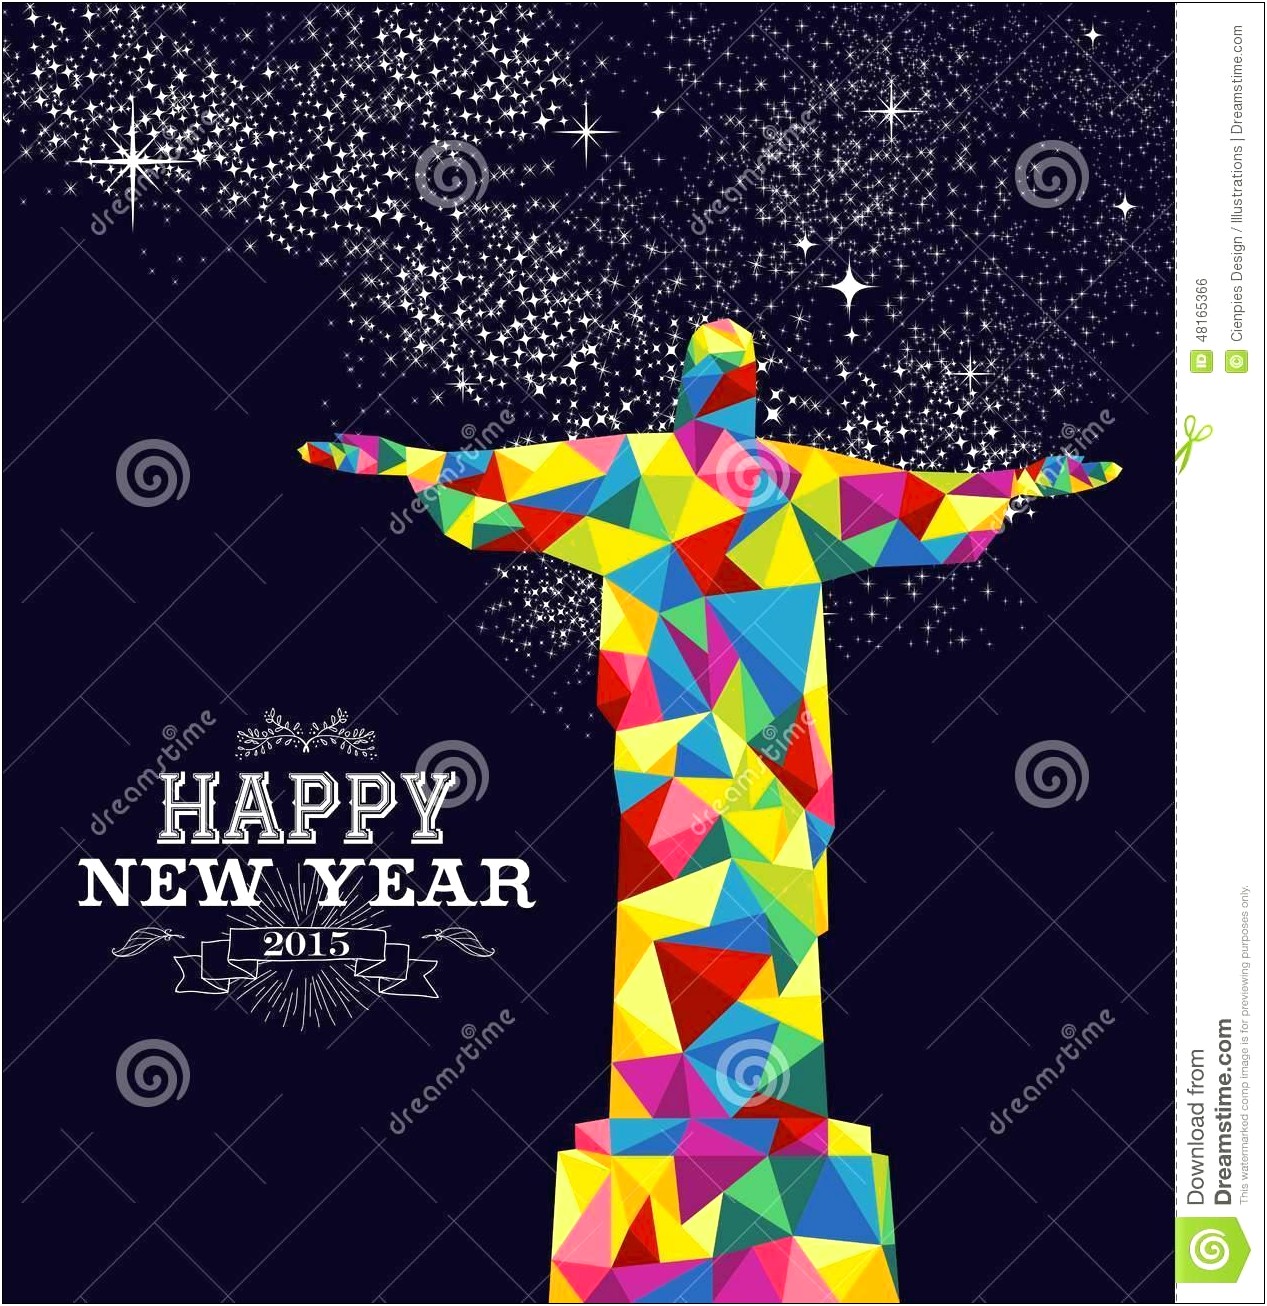 Free New Year 2015 Greeting Card Templates